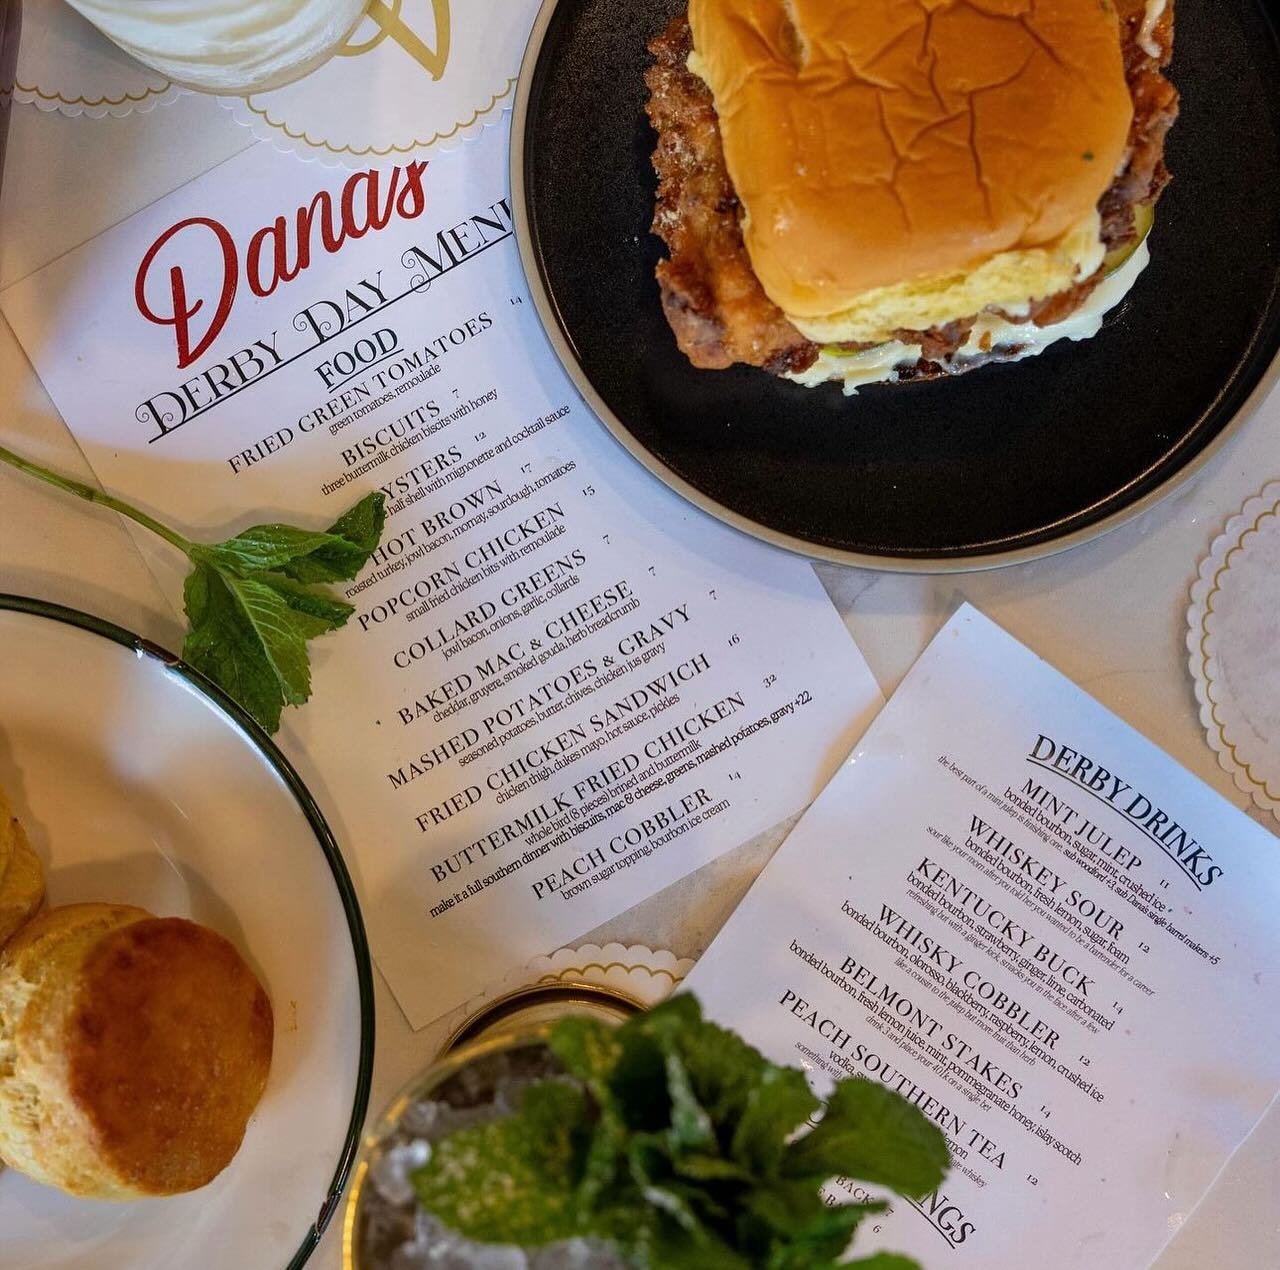 Hey there! Here&rsquo;s another fun event coming up at The Landing this Saturday. @drinkatdanas is hosting the perfect Kentucky Derby takeover! Get ready for their southern-inspired menu and some amazing derby drinks. They&rsquo;ll even have the race